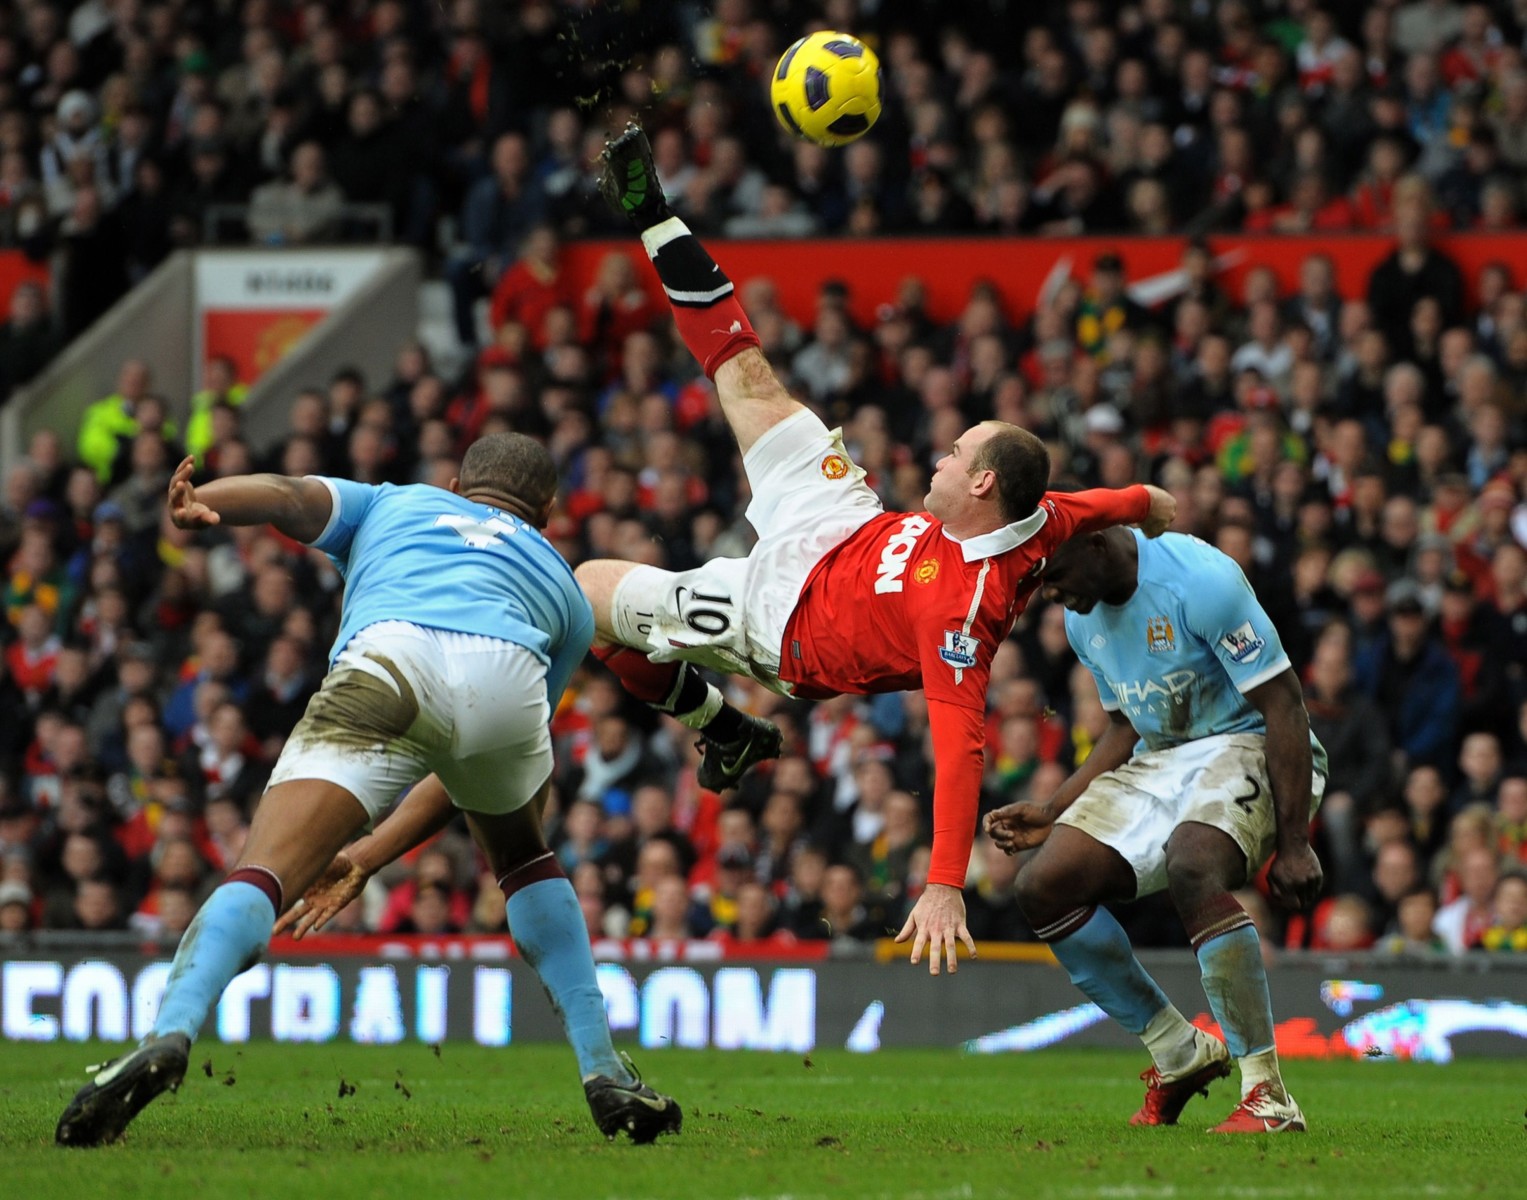 , Man Utd legend Wayne Rooney reveals his favourite goal ever – and it’s not THAT iconic overhead kick against City